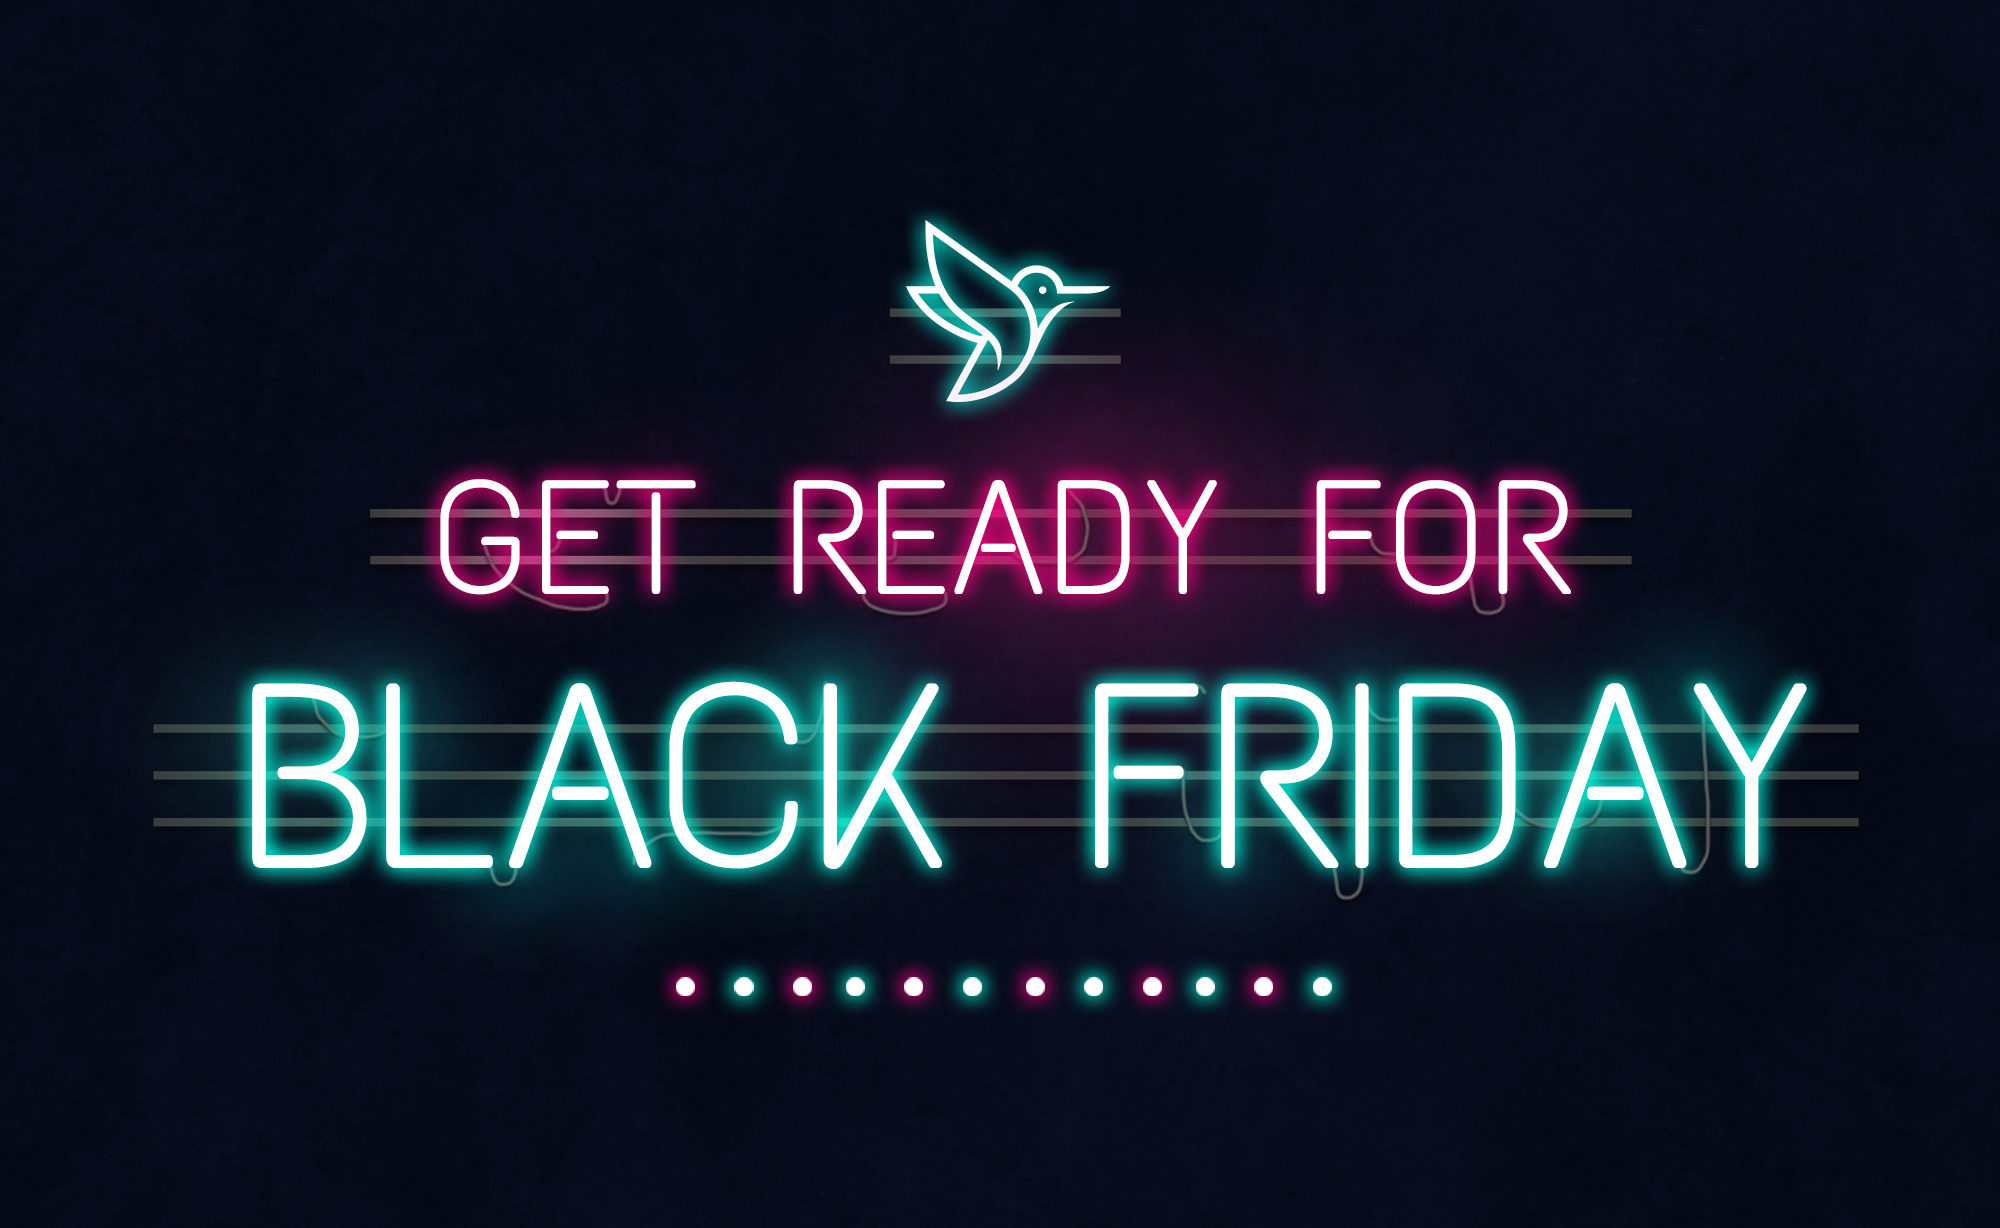 A neon sign style graphic showing off a black friday message below the Giftpro logo